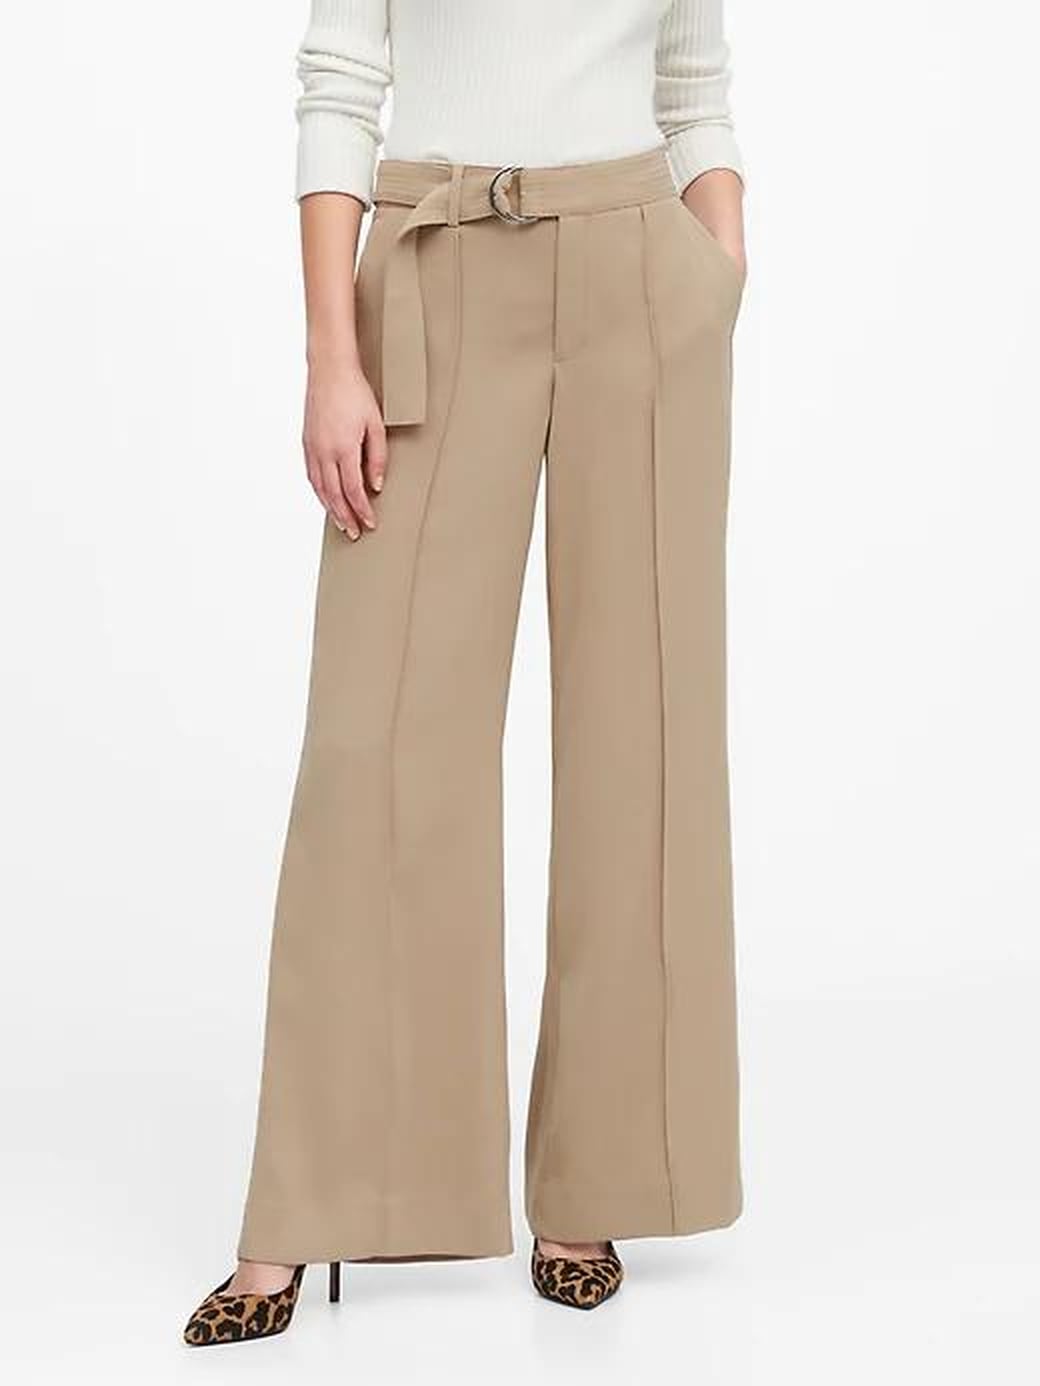 The Best Things on Sale at Banana Republic | POPSUGAR Fashion